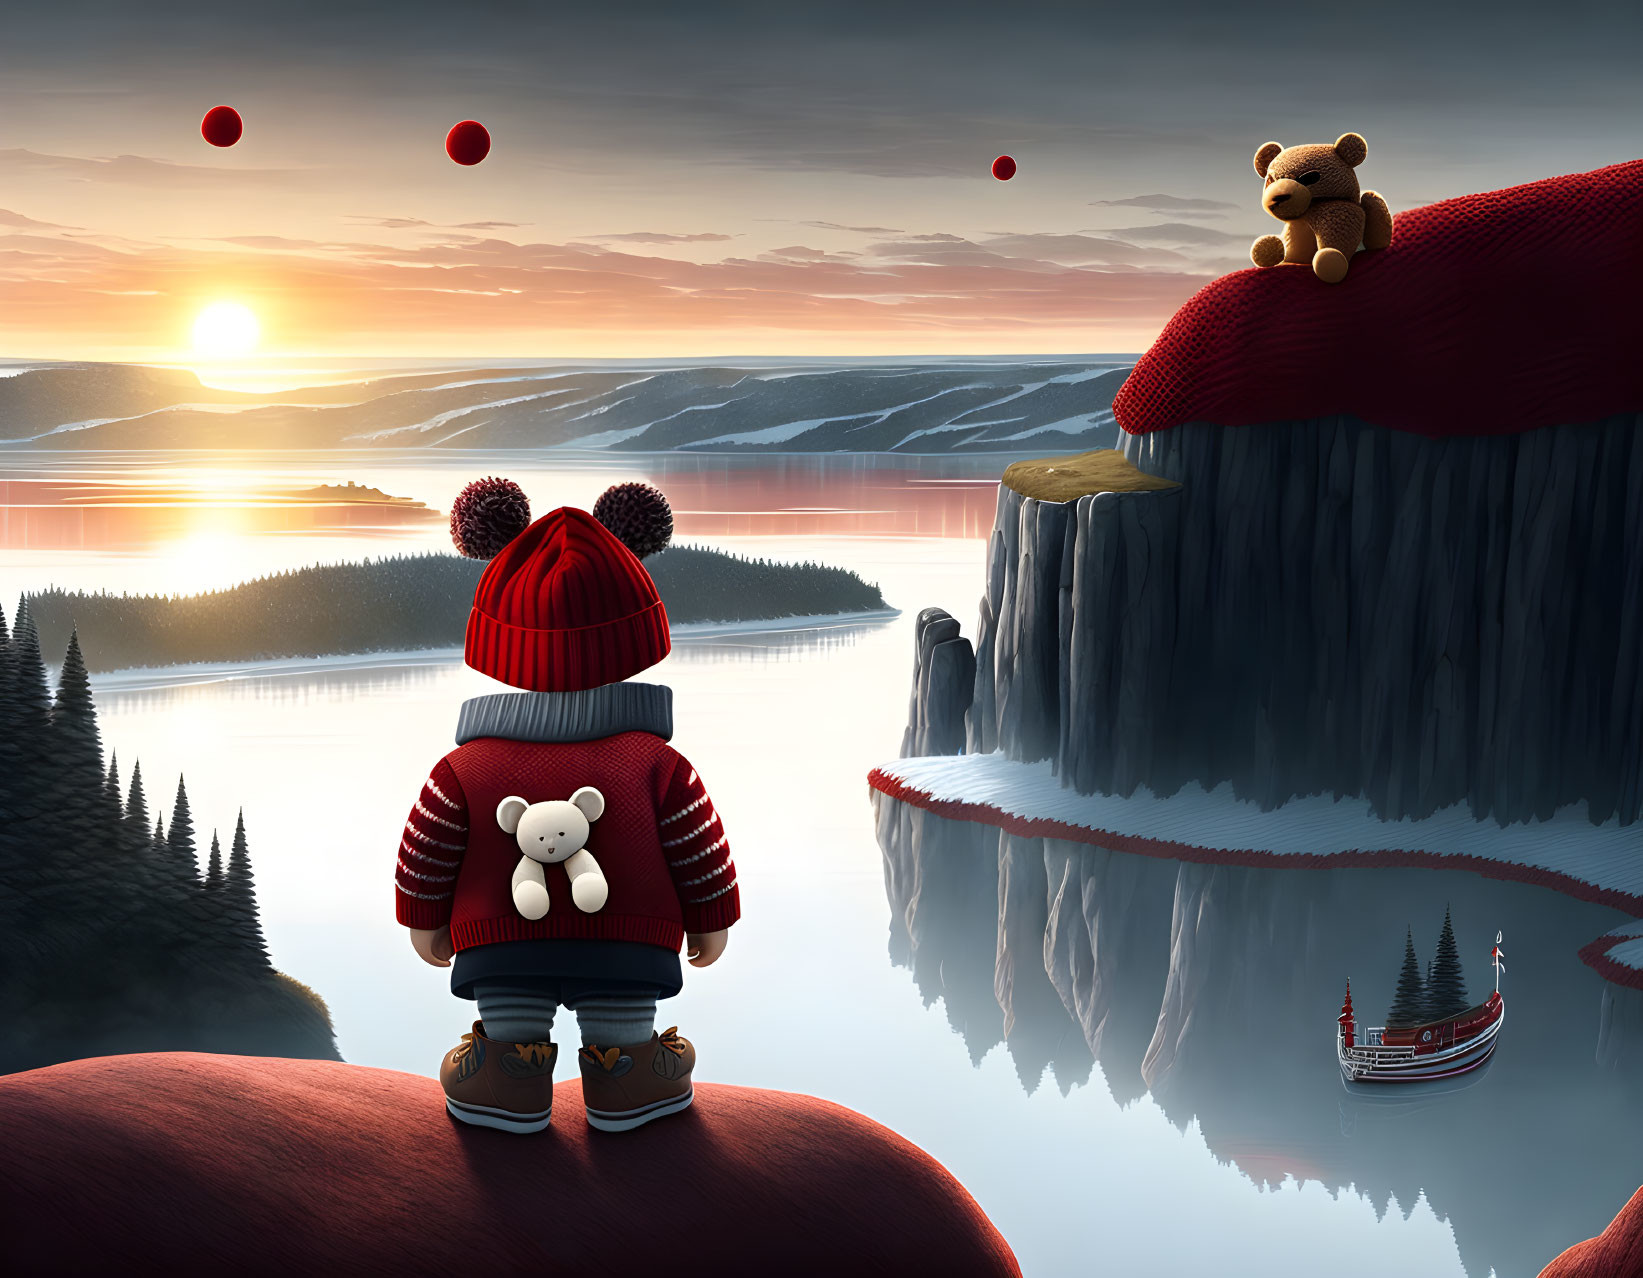 Child in Red Hat with Teddy Bear in Surreal Sunset Landscape